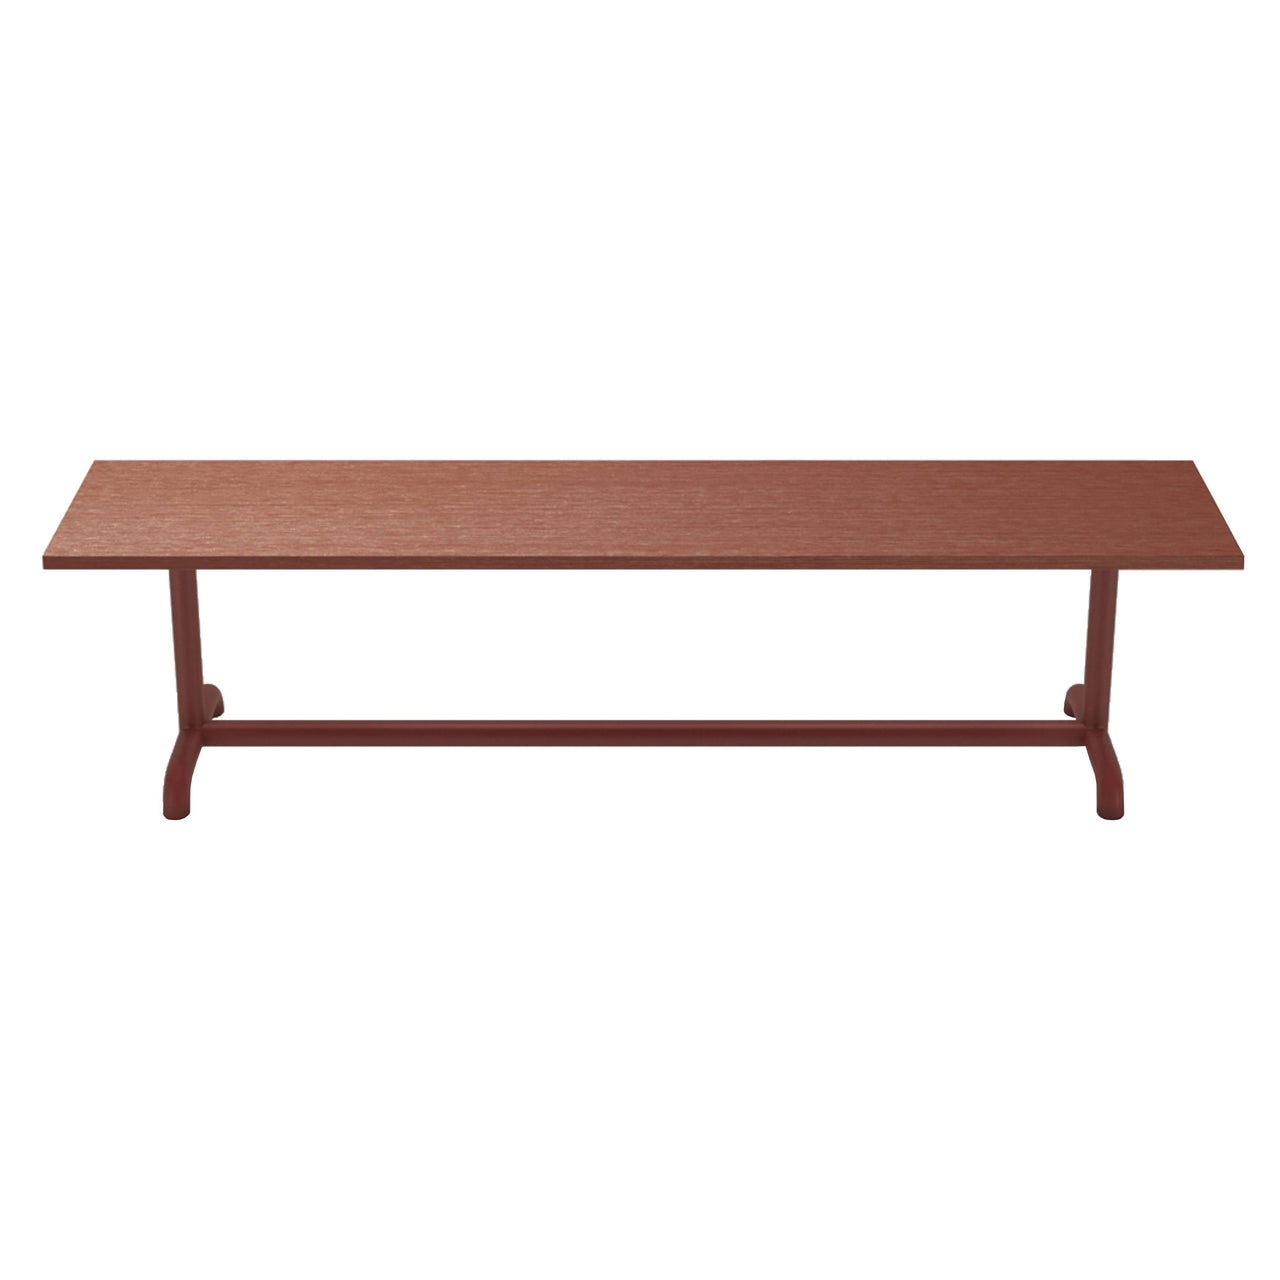 Unify Bench: Red Brown